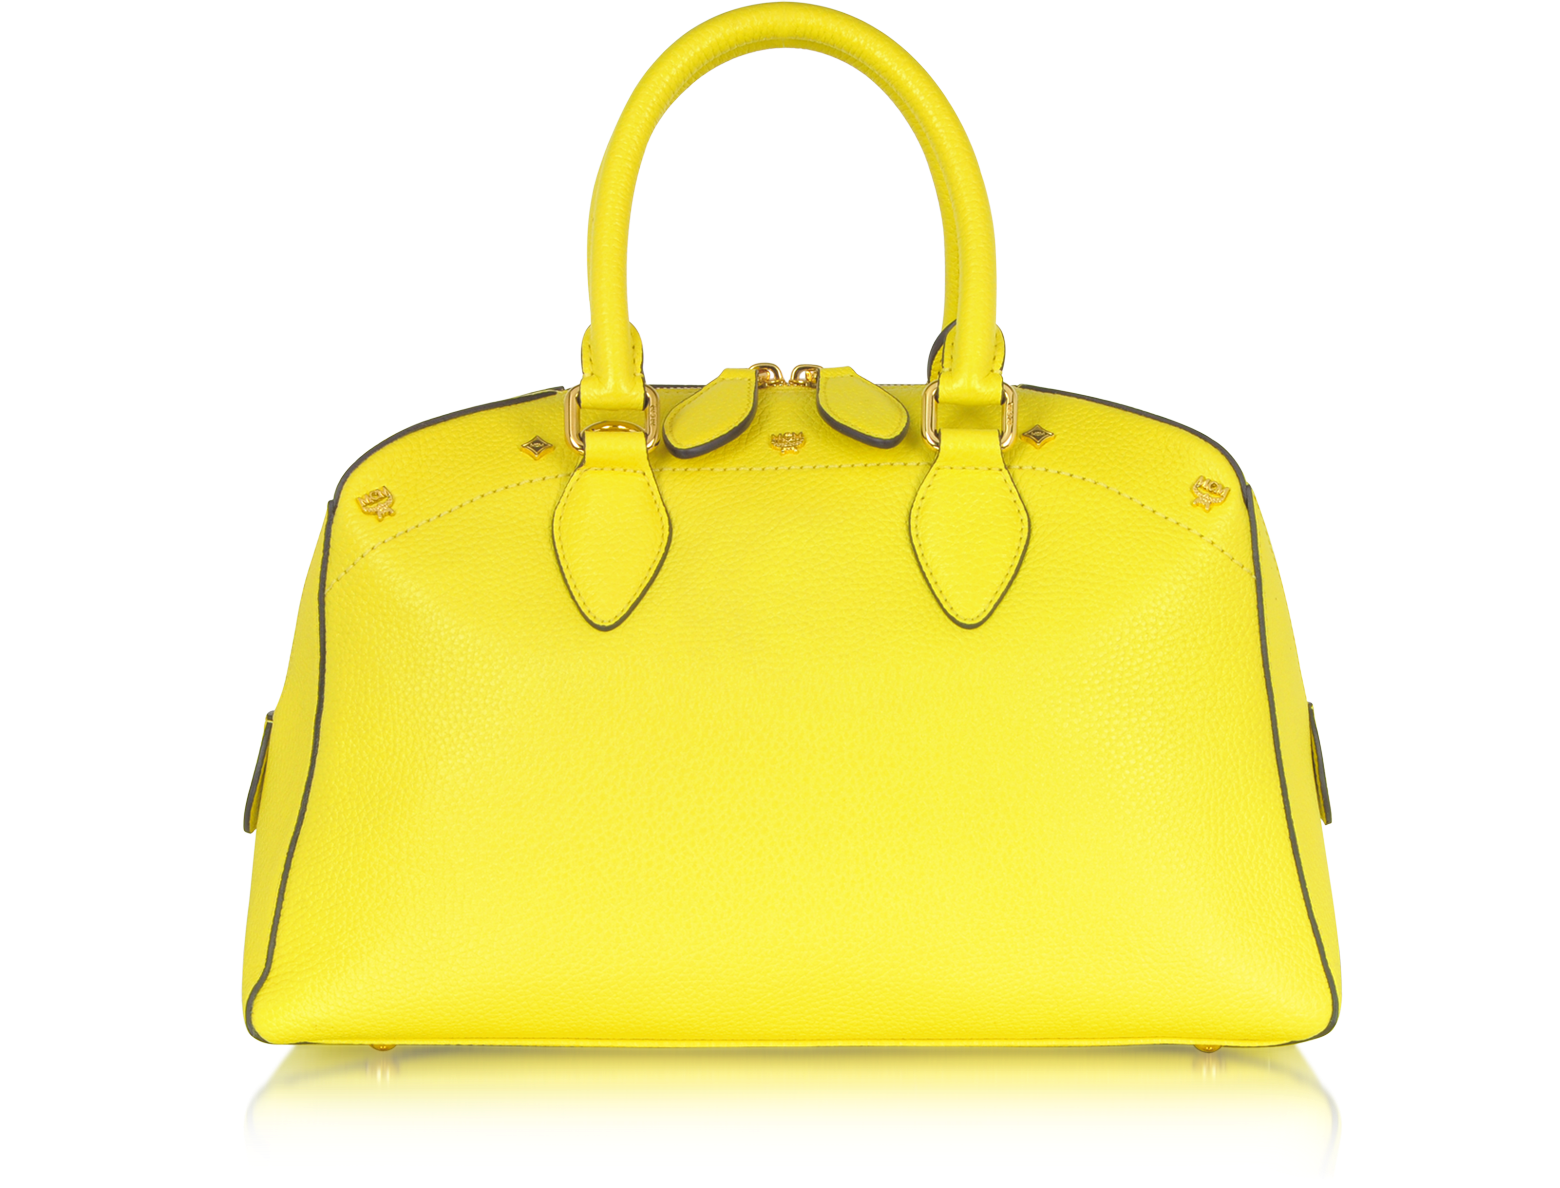 MCM Yellow First Lady - Small Leather Boston Bag at FORZIERI UK